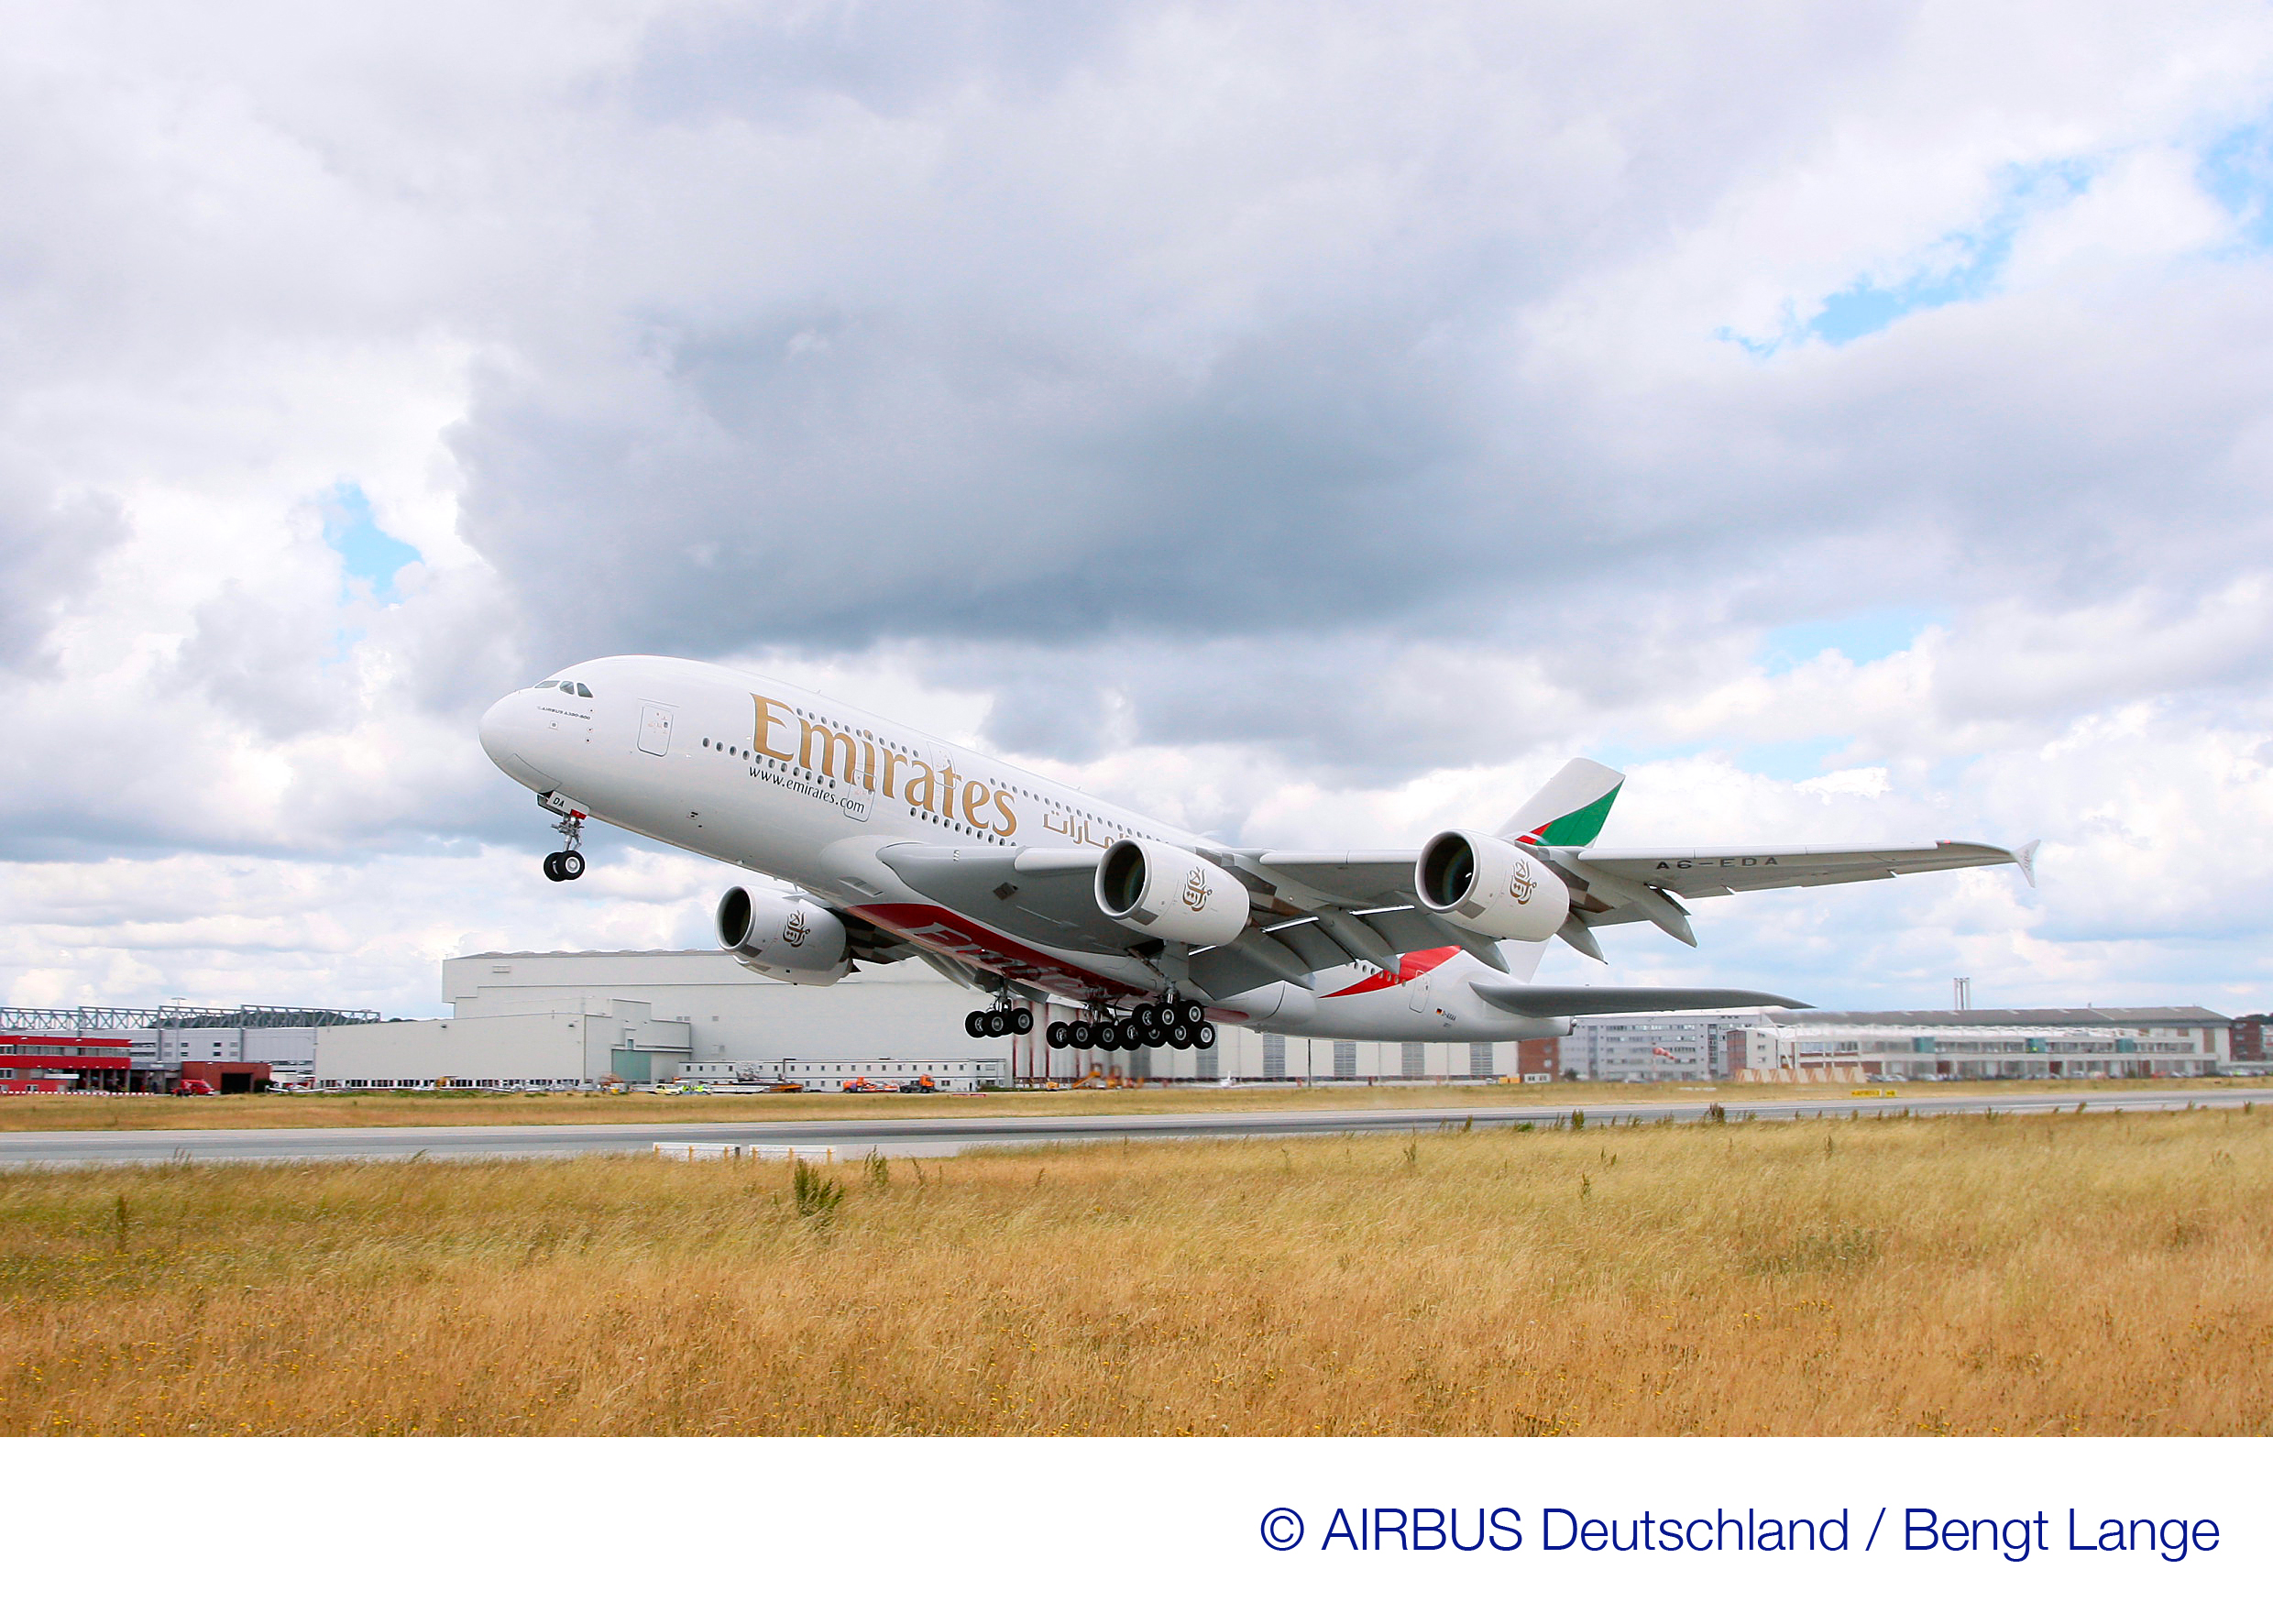 Aeroplans - Dubai based Emirates Airline has ordered a further 32 A380s from Airbus, taking their total firm orders for the iconic flagship of the 21st century to 90 aircraft. June 2010 photo by Dengt Lang © Airbus S.A.S.